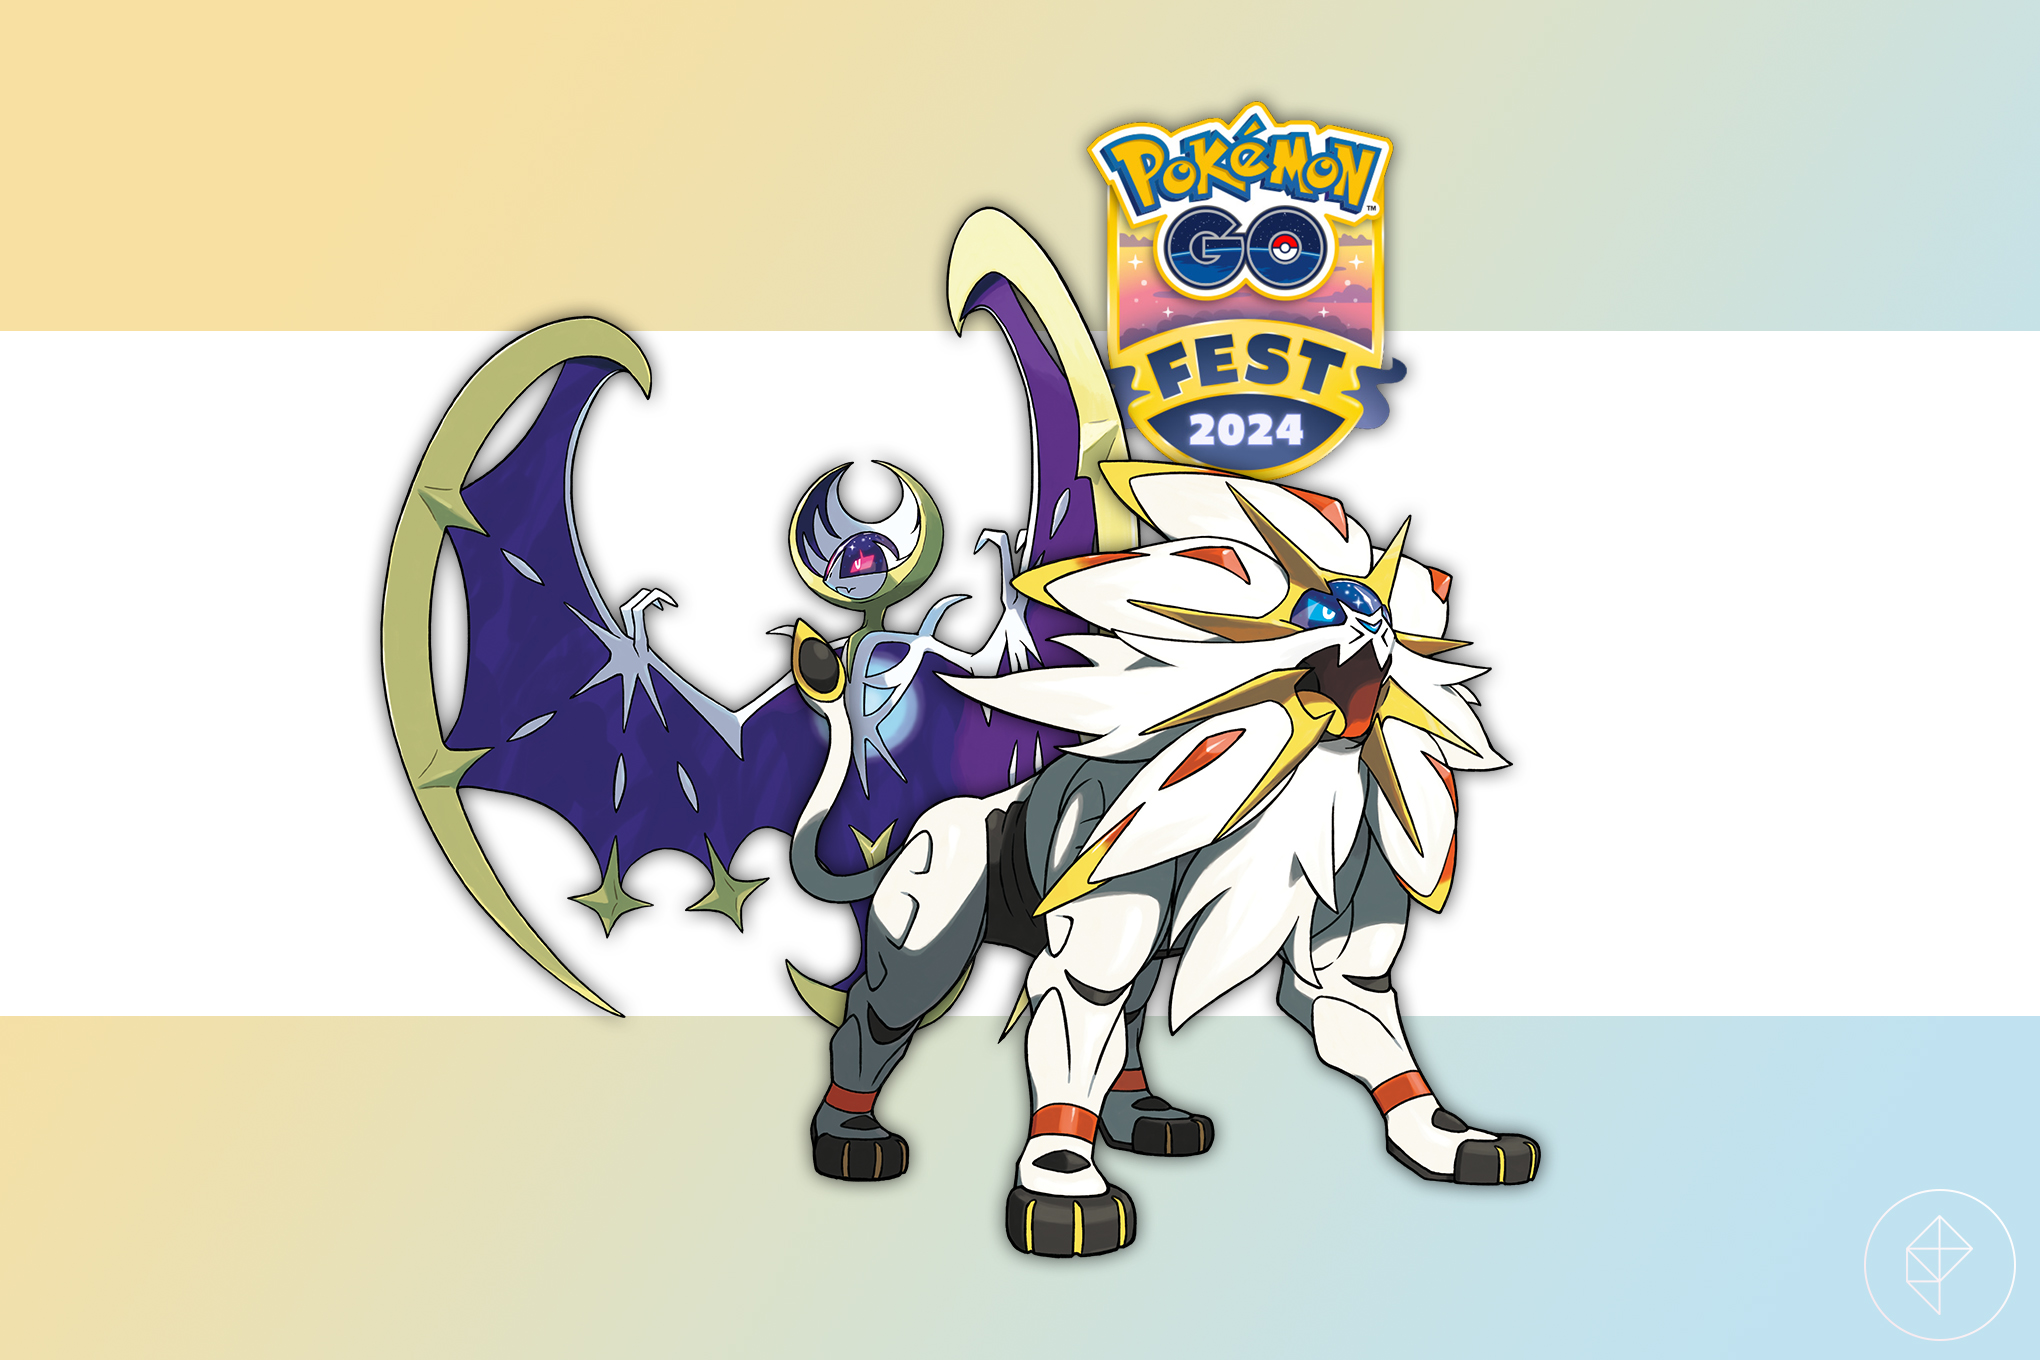 Solgaleo and Lunala in front of the Pokémon Go Fest logo